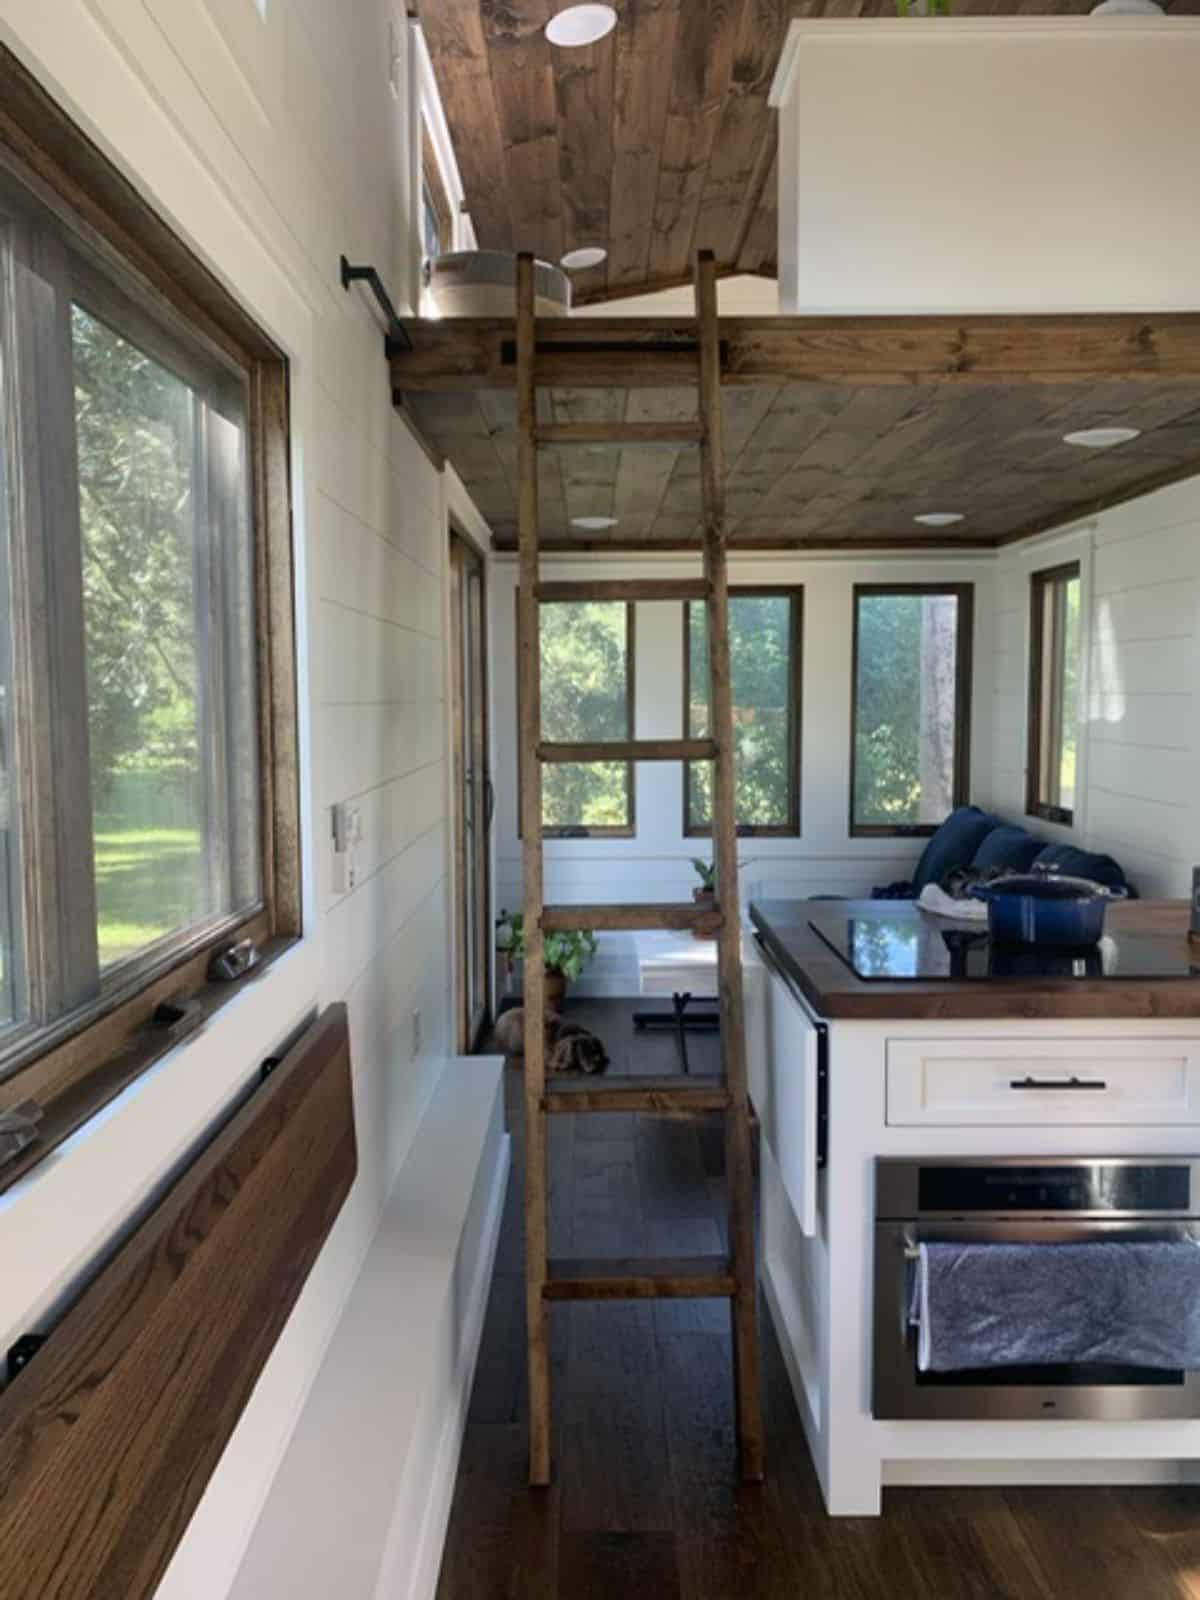 collapsible folding table under the window and ladder leading to the loft of gooseneck tiny home